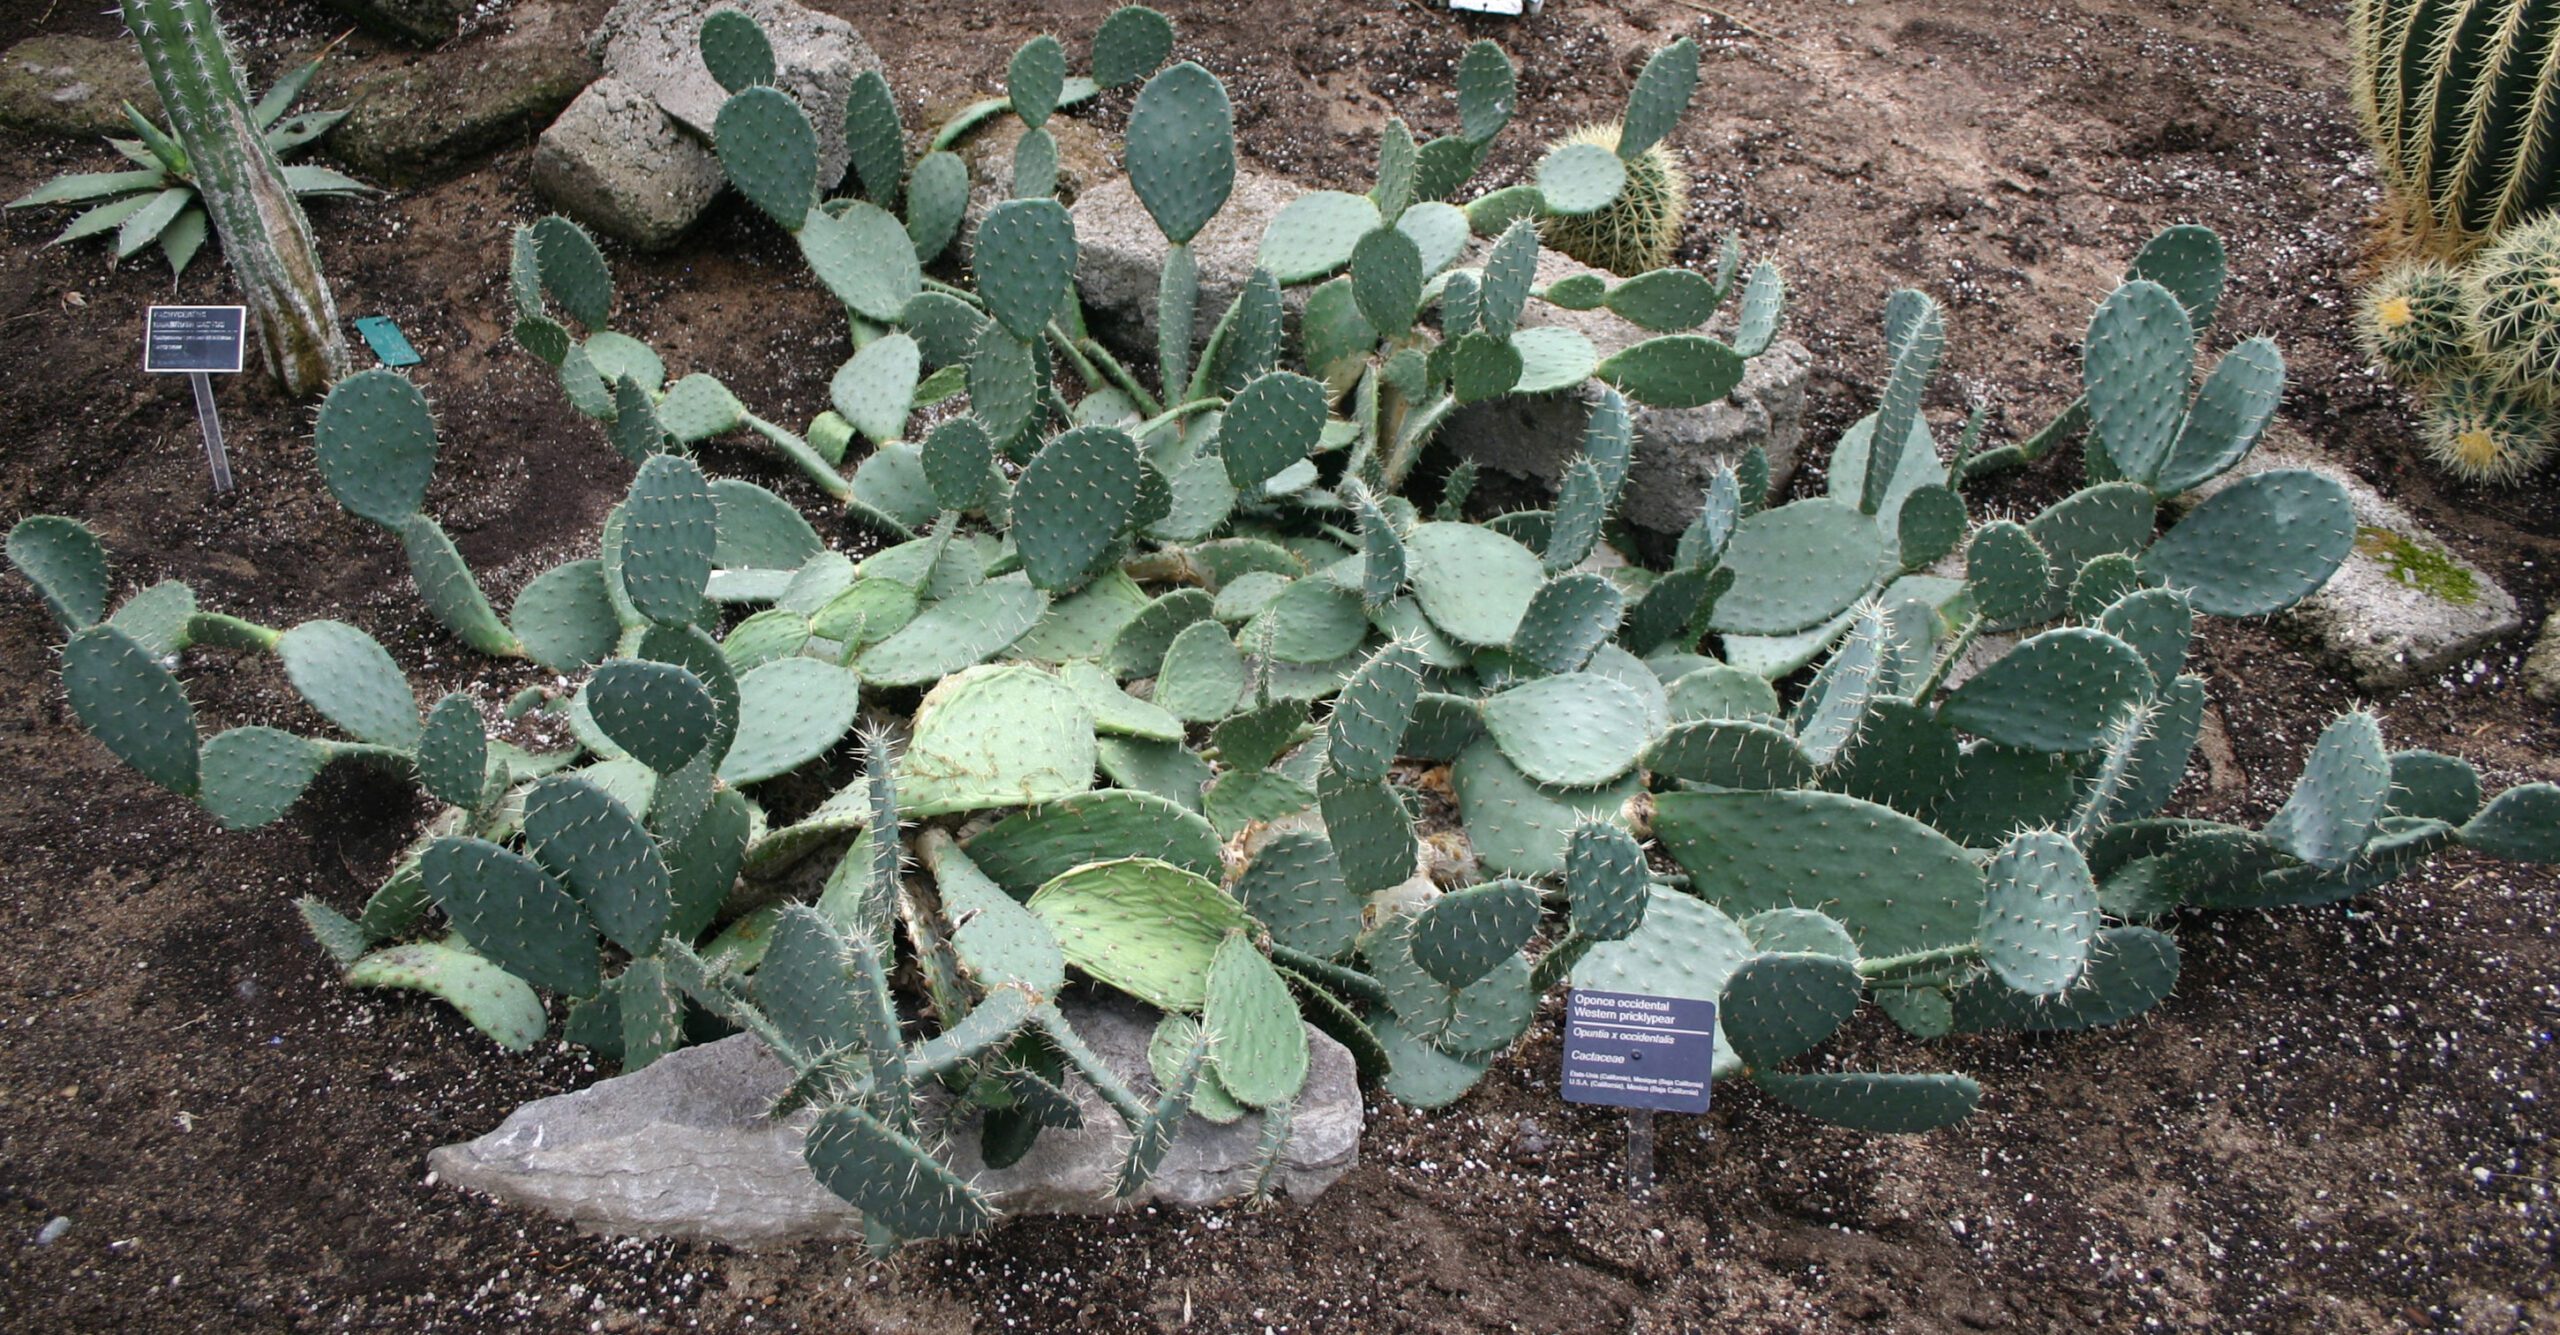 A low-growing cactus on sandy ground with lots of prickly “pear-shaped” leaves.